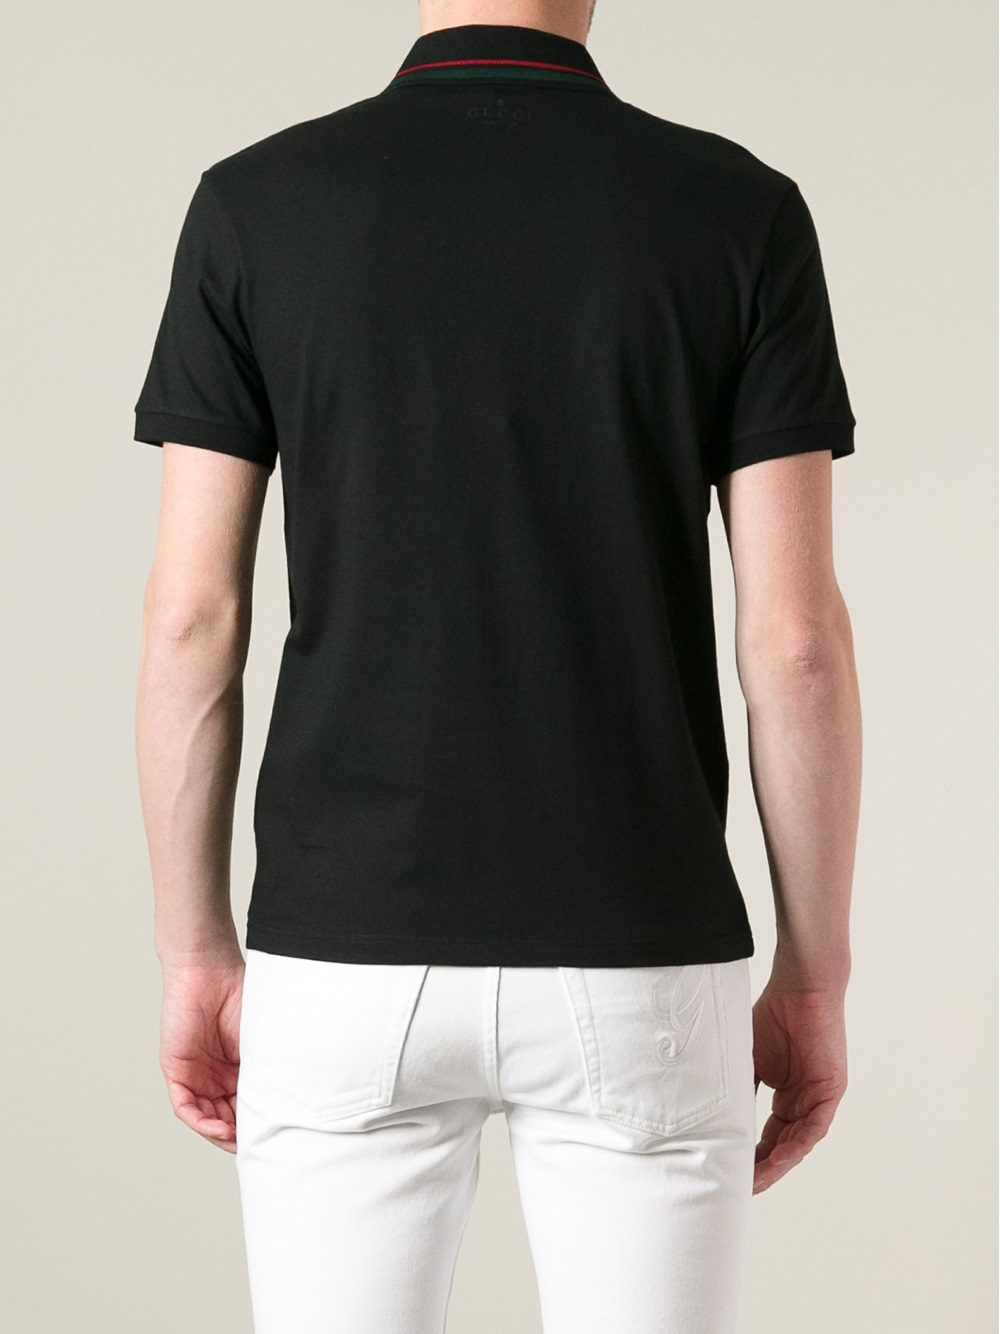 Gucci Classic Polo Shirt in Black for Men - Lyst